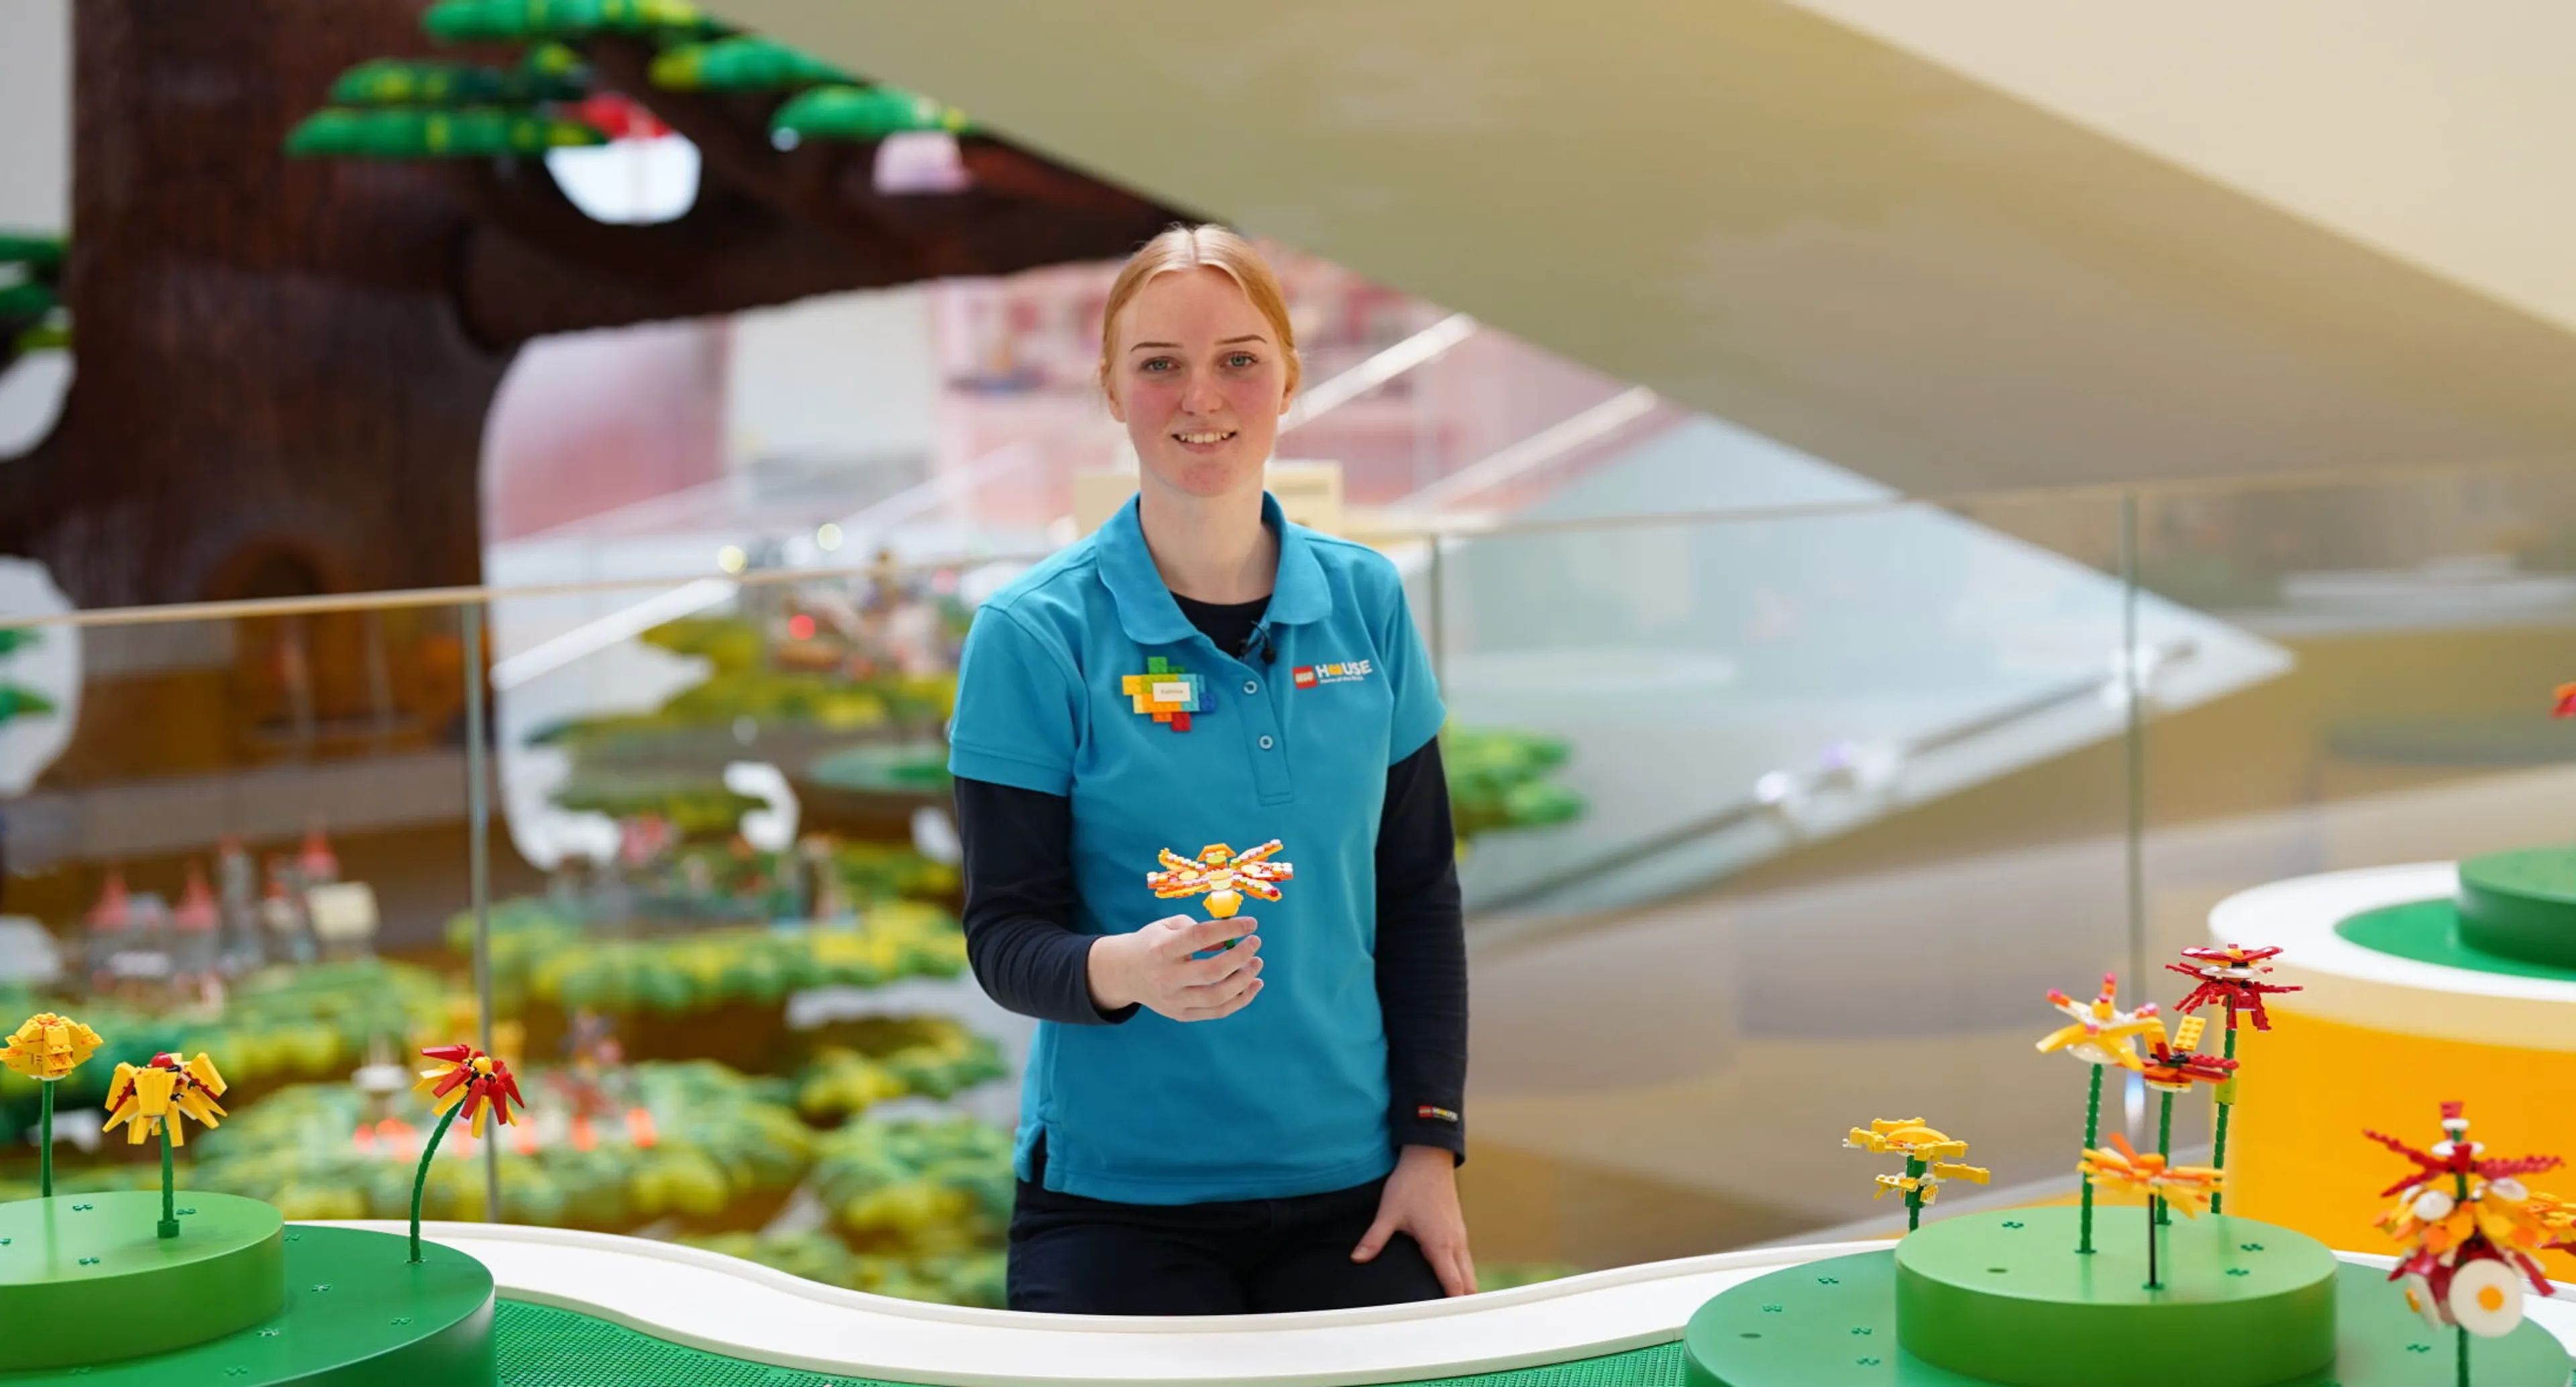 A lego house play agent holds her flower build